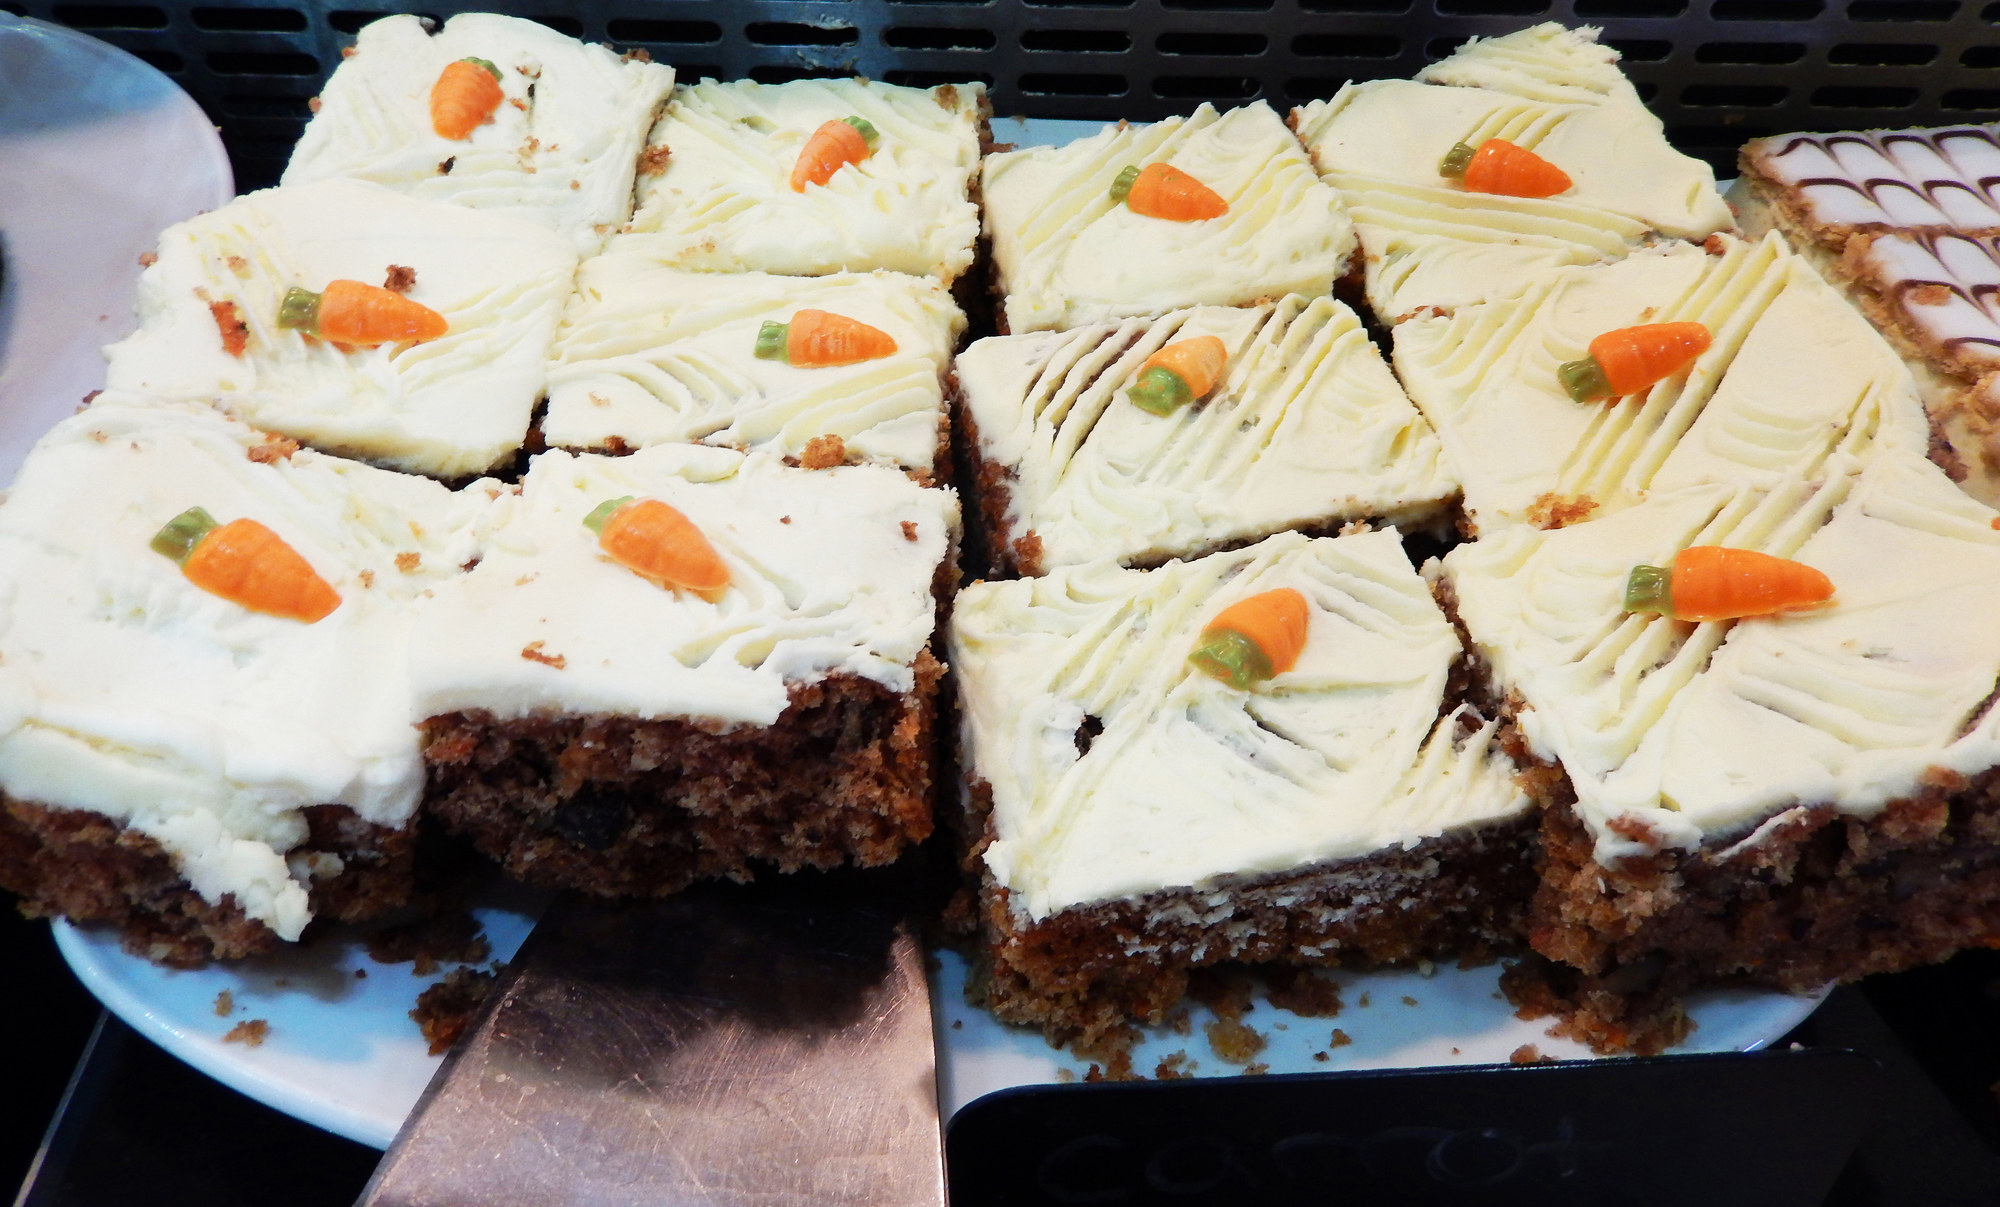 Photo showing an indulgent dessert served at a restaurant - slices of homemade carrot cake.  The carrot cake was topped with a rich cream cheese icing and decorated with orange fondant carrots.